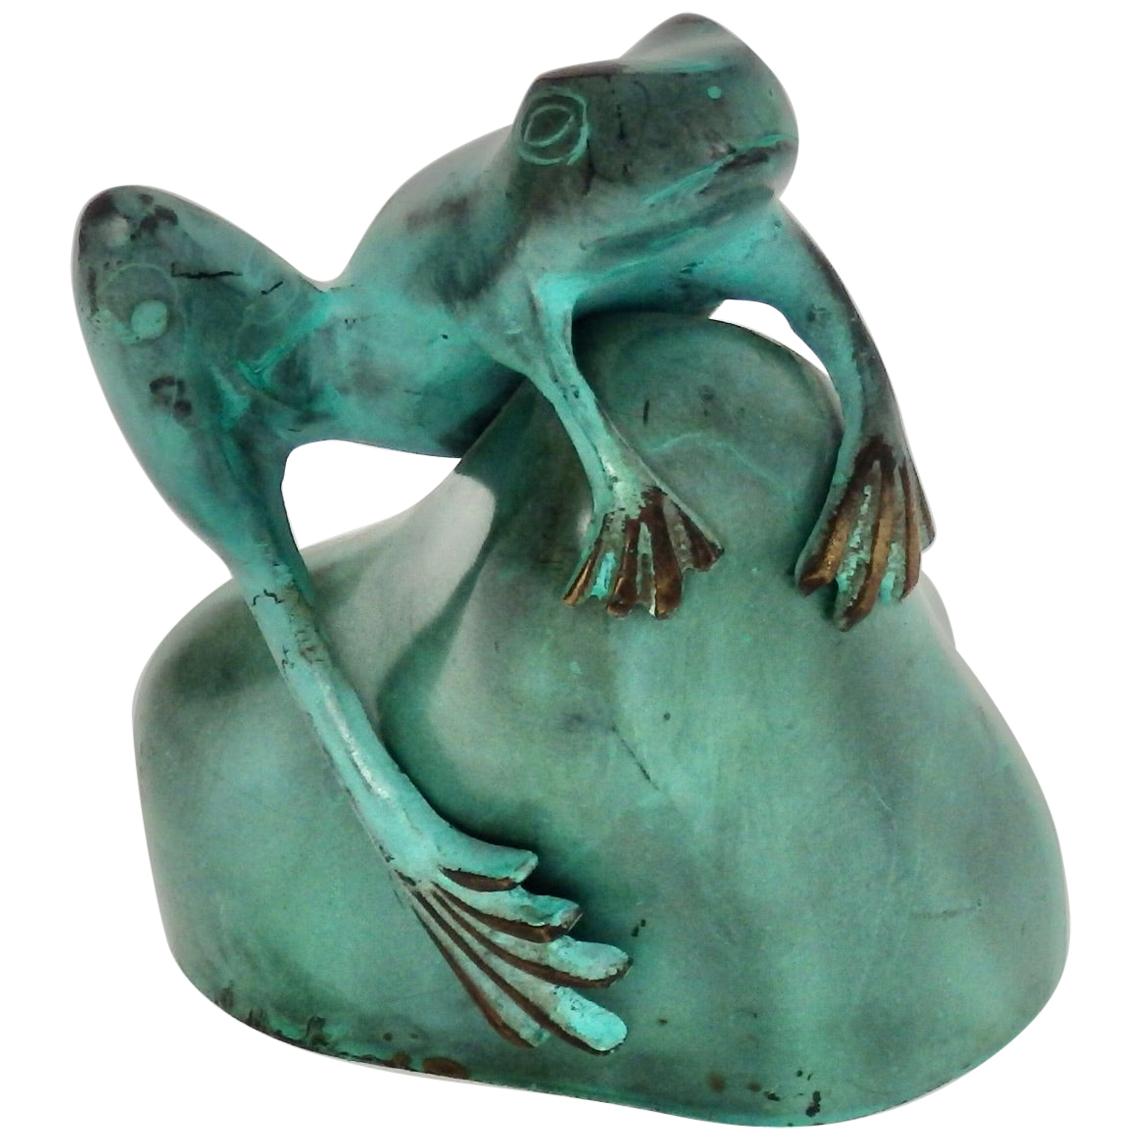 Green Patina'd Bronze Metal Frog Statue, Style of Marshall Fredericks